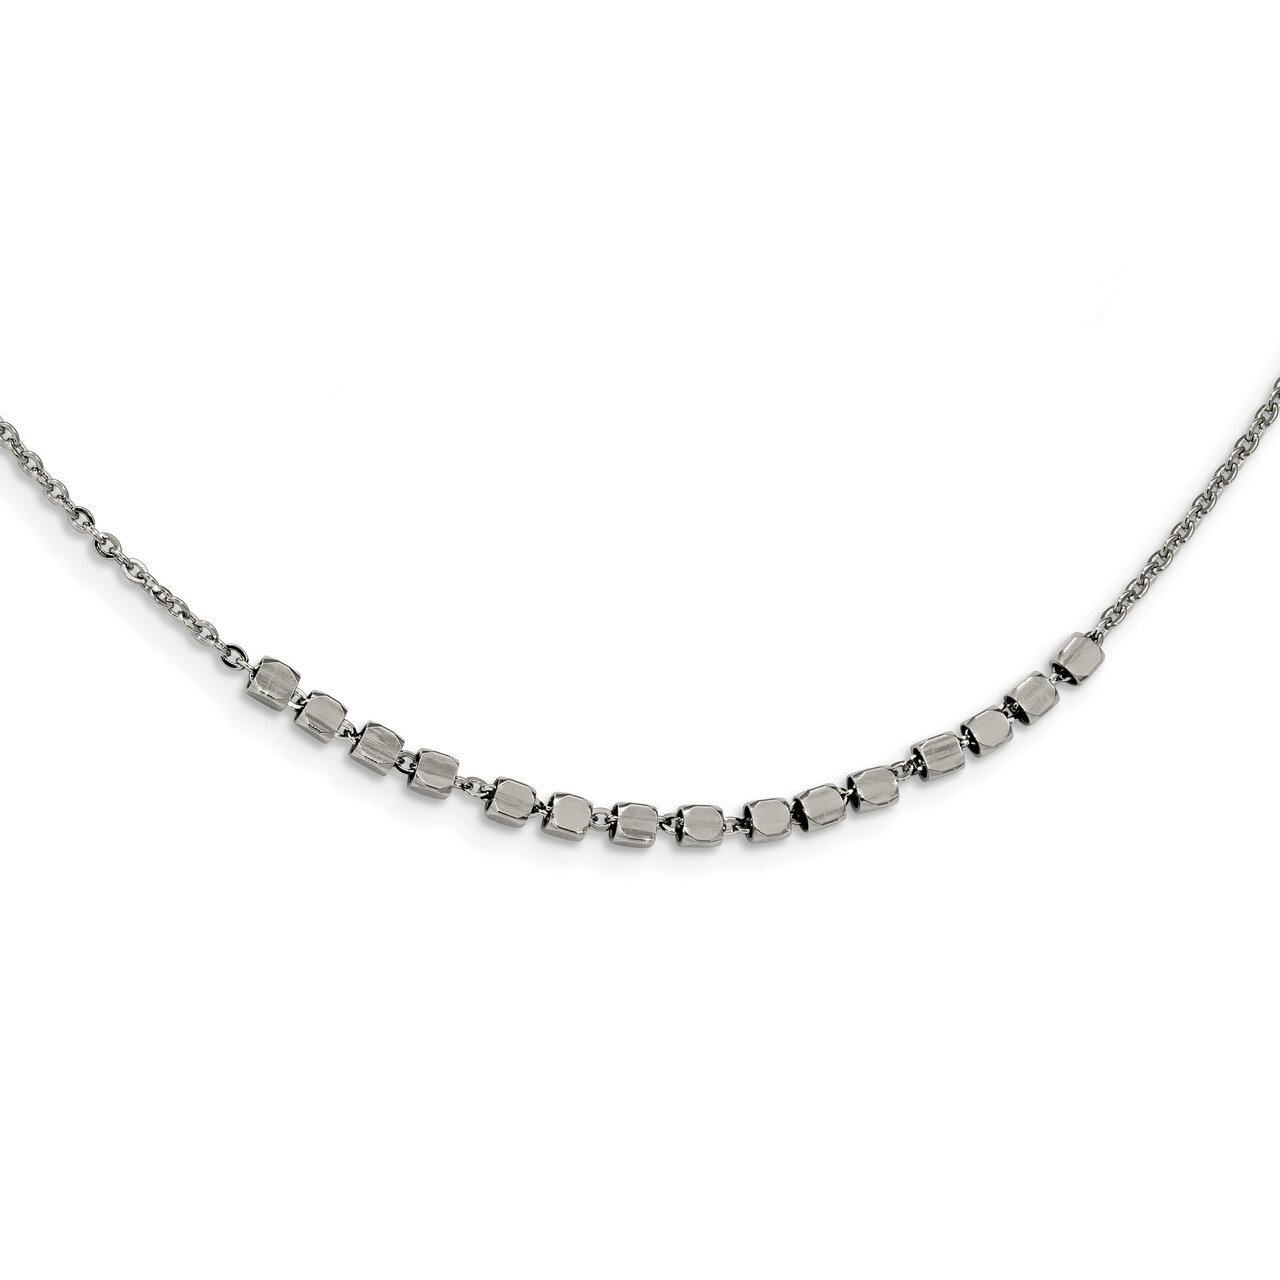 Beaded 18inch with 2 inch Extender Necklace Stainless Steel Polished SRN2482-16